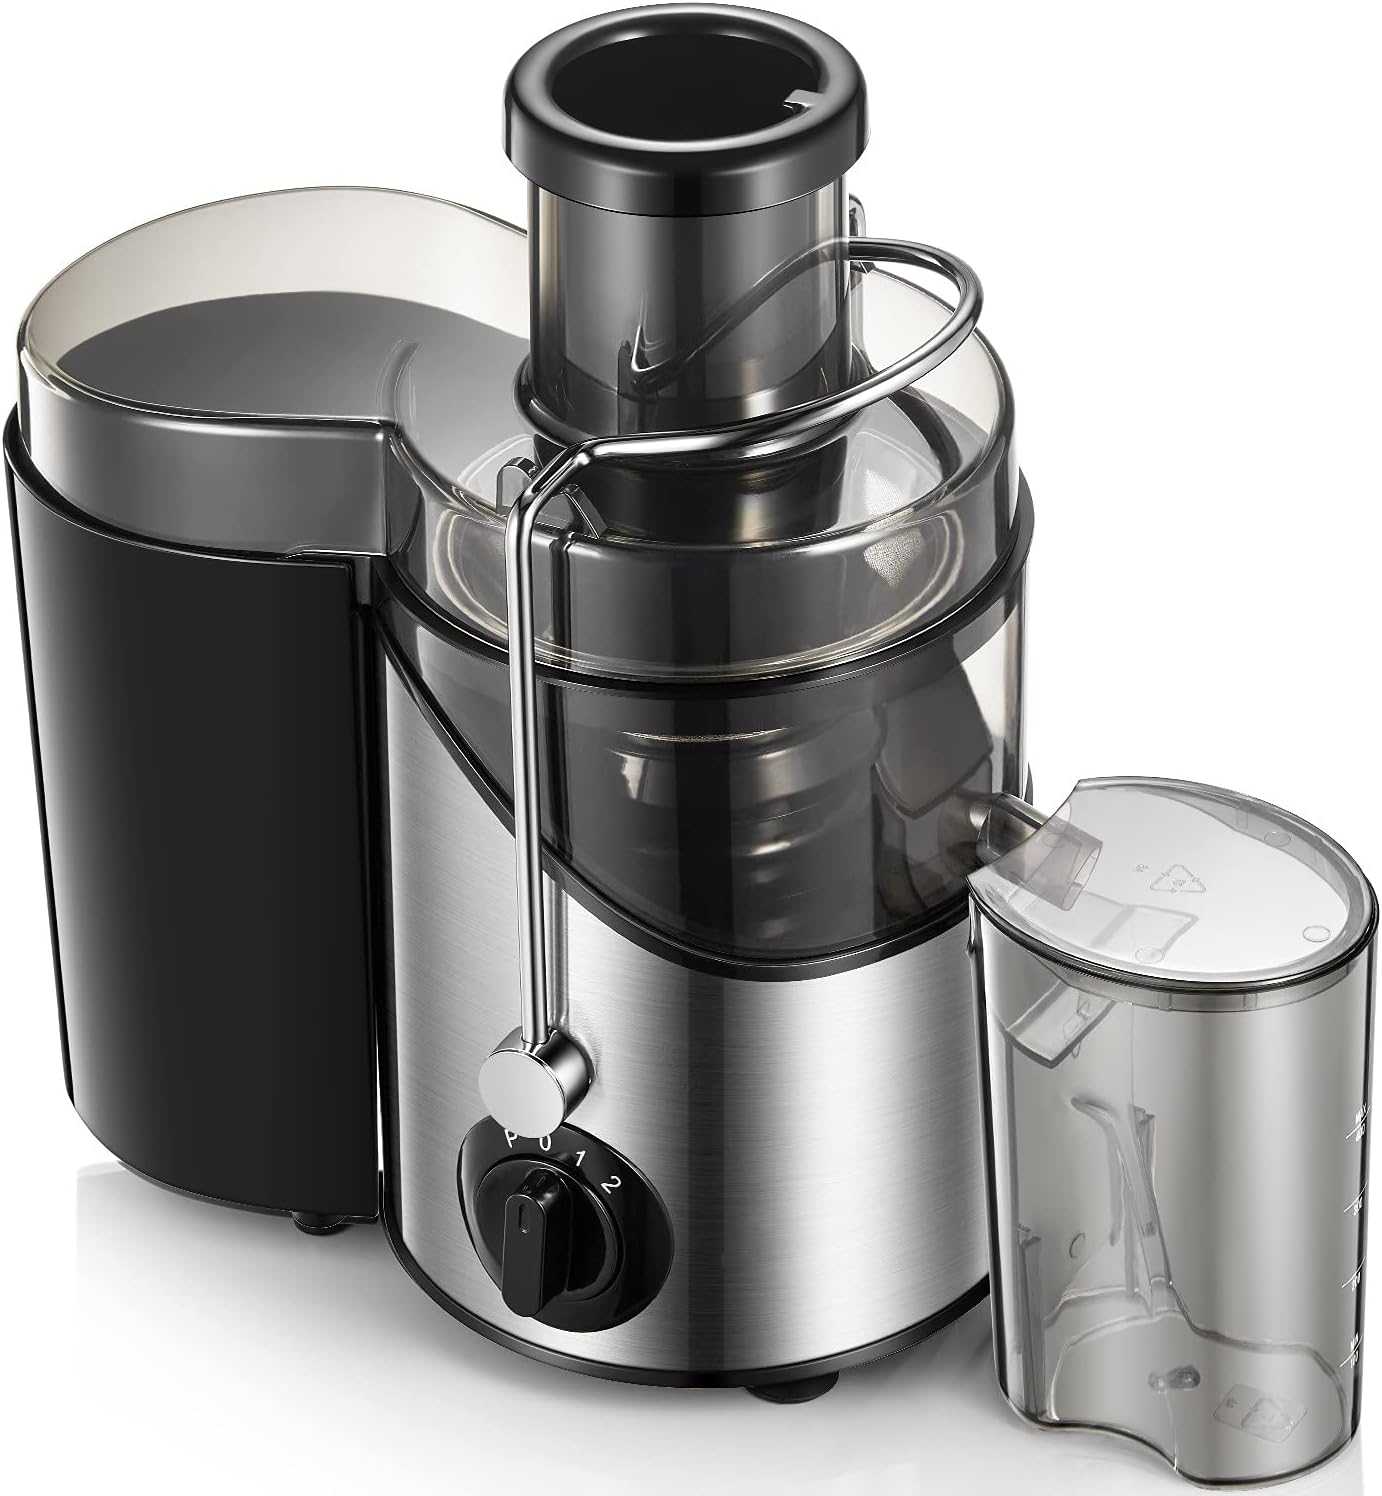 3 Speed Juice Extractor with Non-Slip Feet BPA-Free with 3'' Wide Mouth for Fruits and Vegs Juicer Machines Easy to Clean